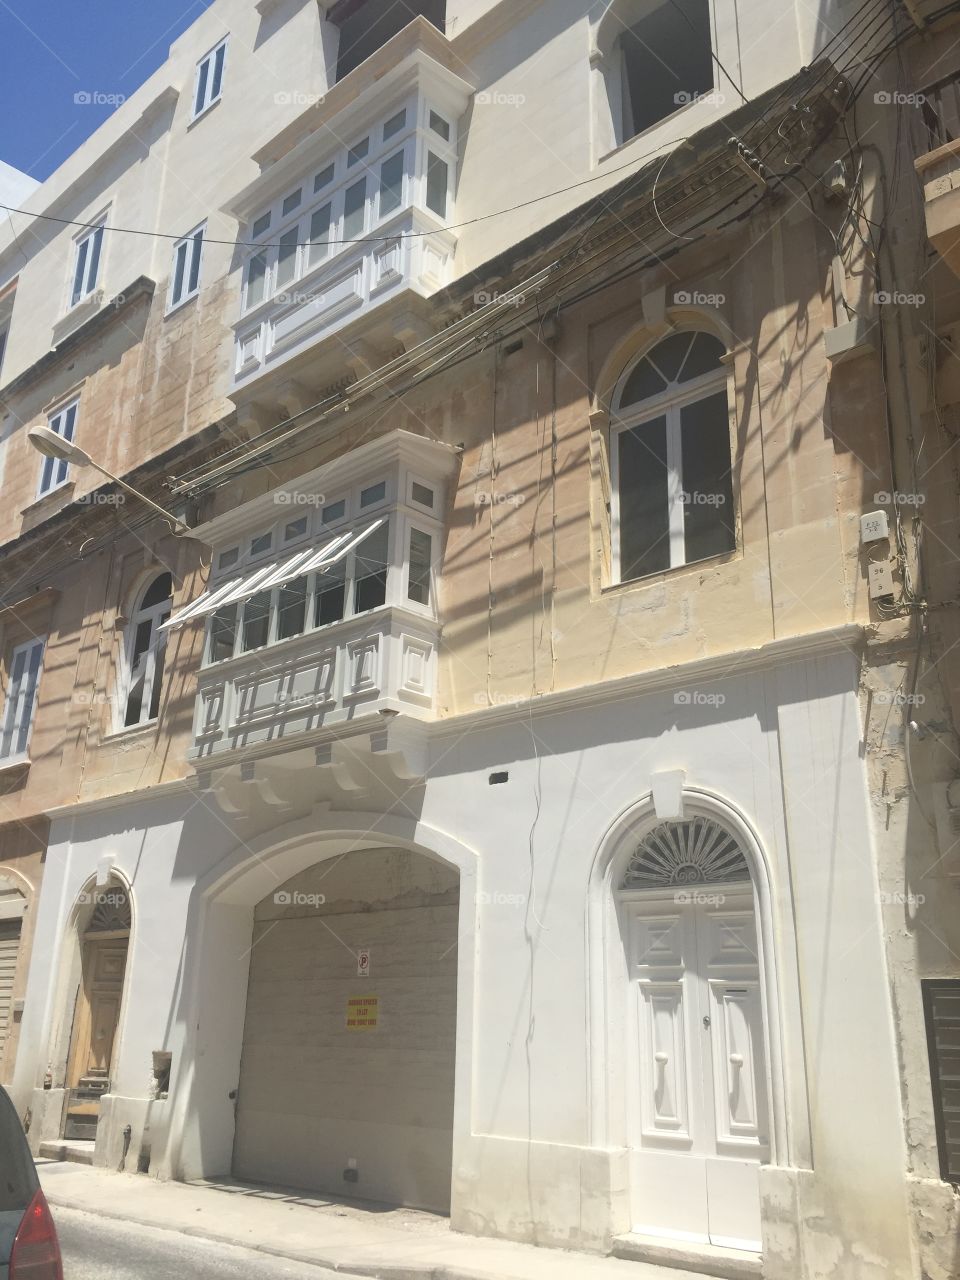 Windows around the World. A street scene in Malta showing the open windows of a traditional, enclosed, Maltese Balcony.